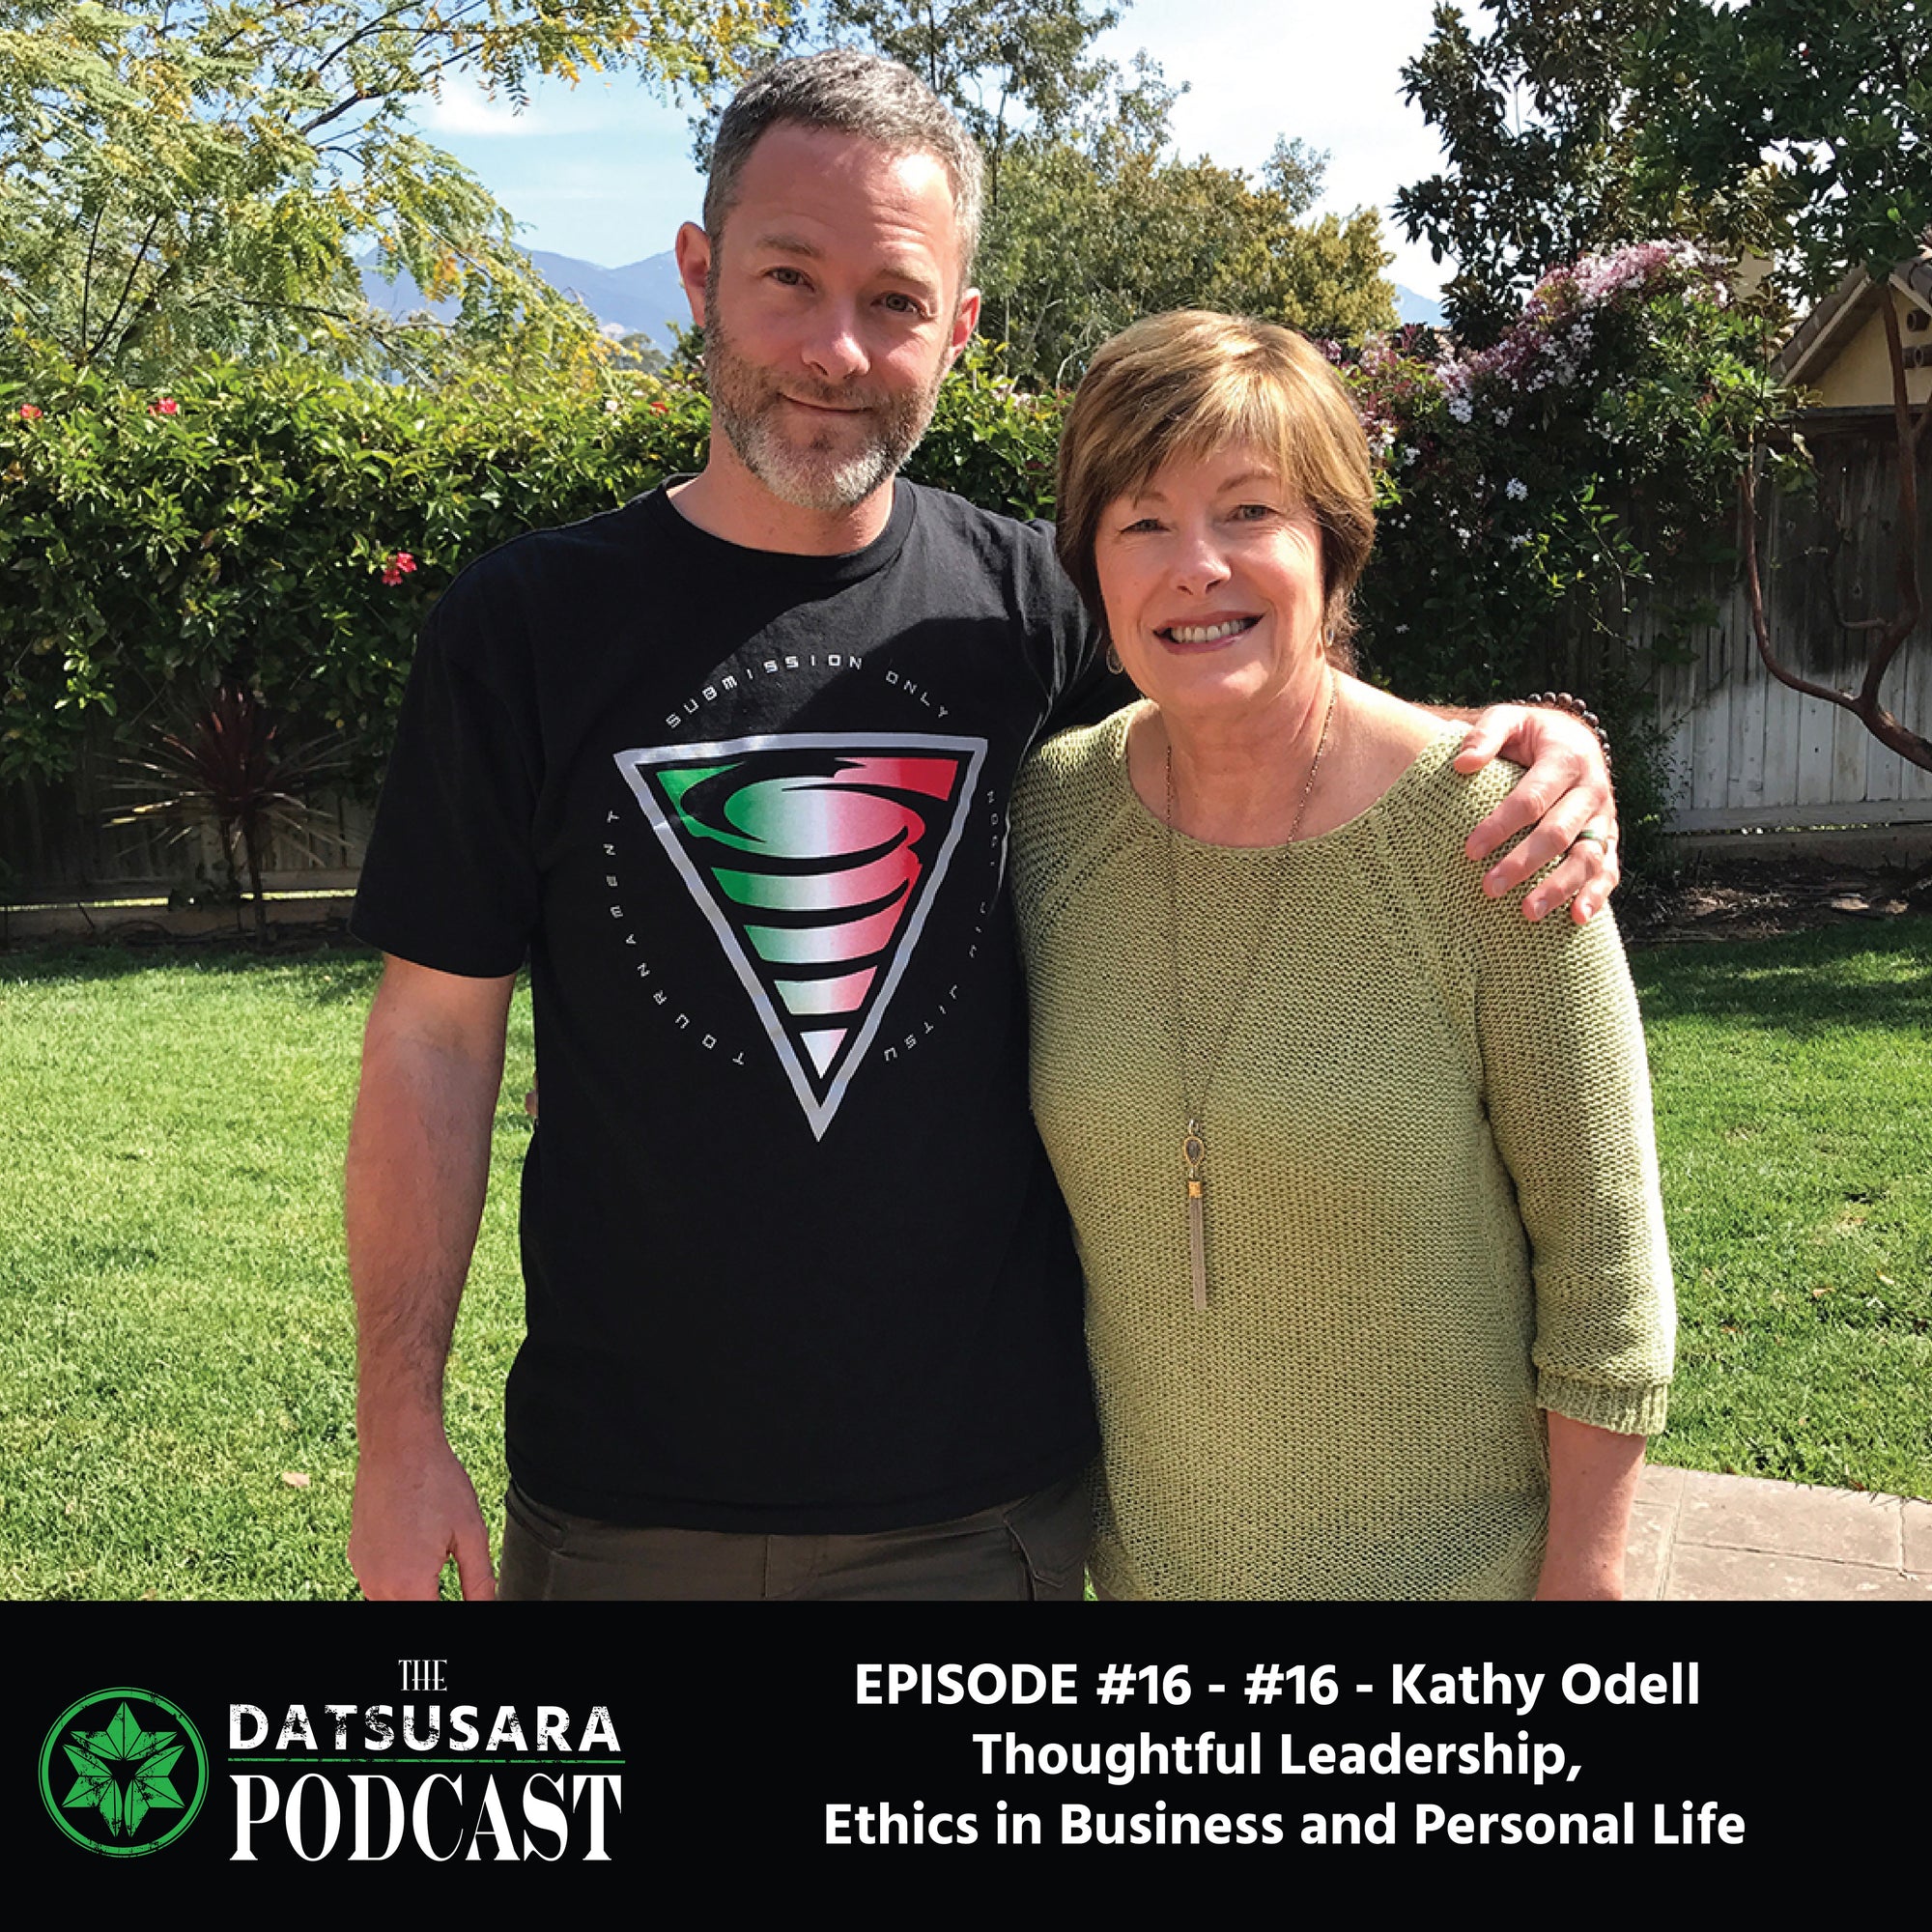 #16 - Kathy Odell - Thoughtful Leadership, Ethics in Business and Personal Life